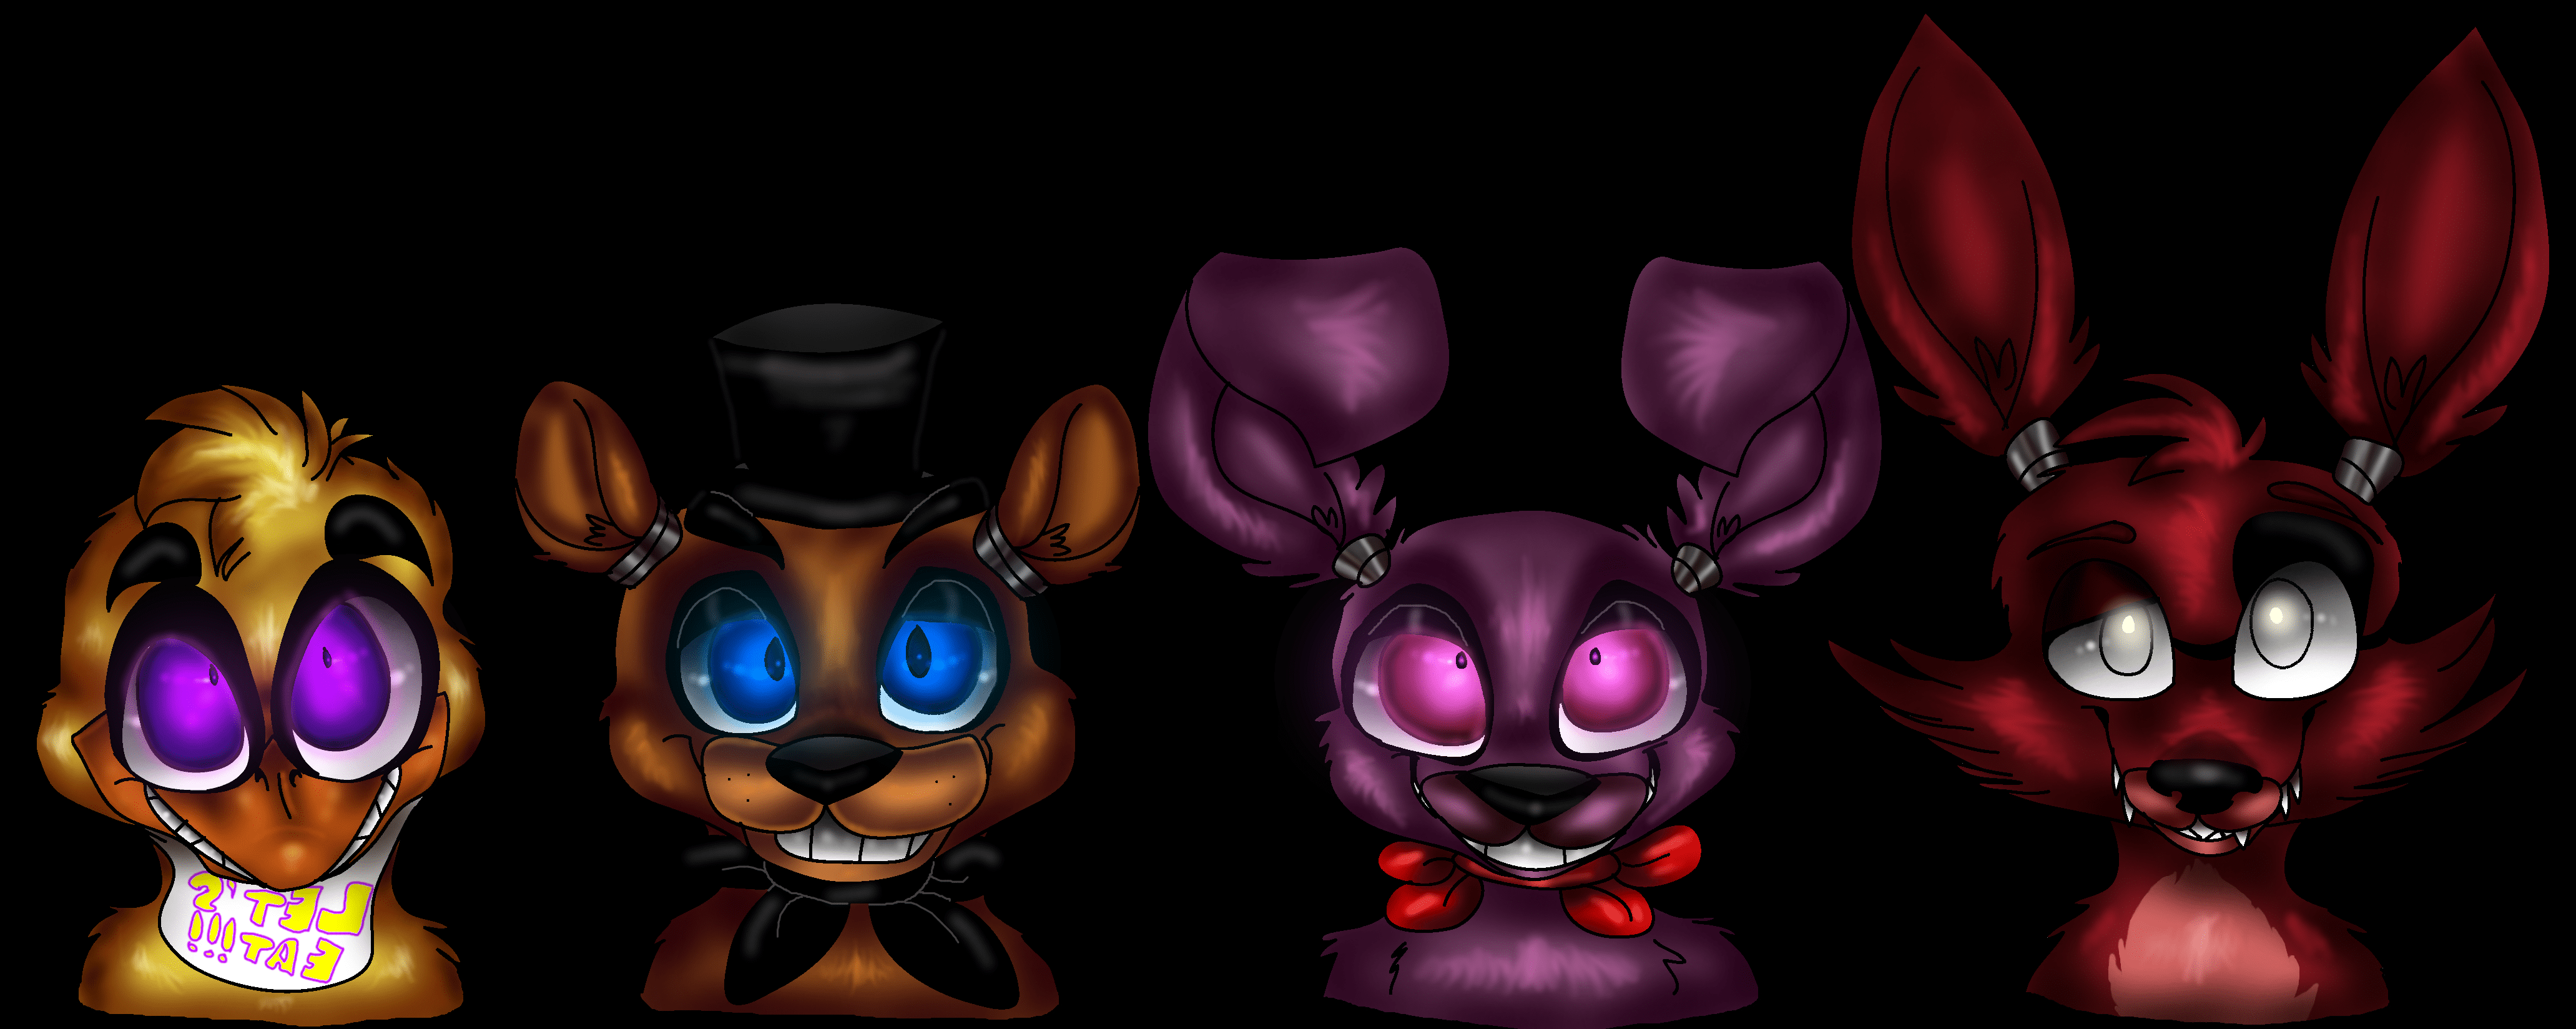 Five Nights At Freddys Wallpapers Top Free Five Nights At